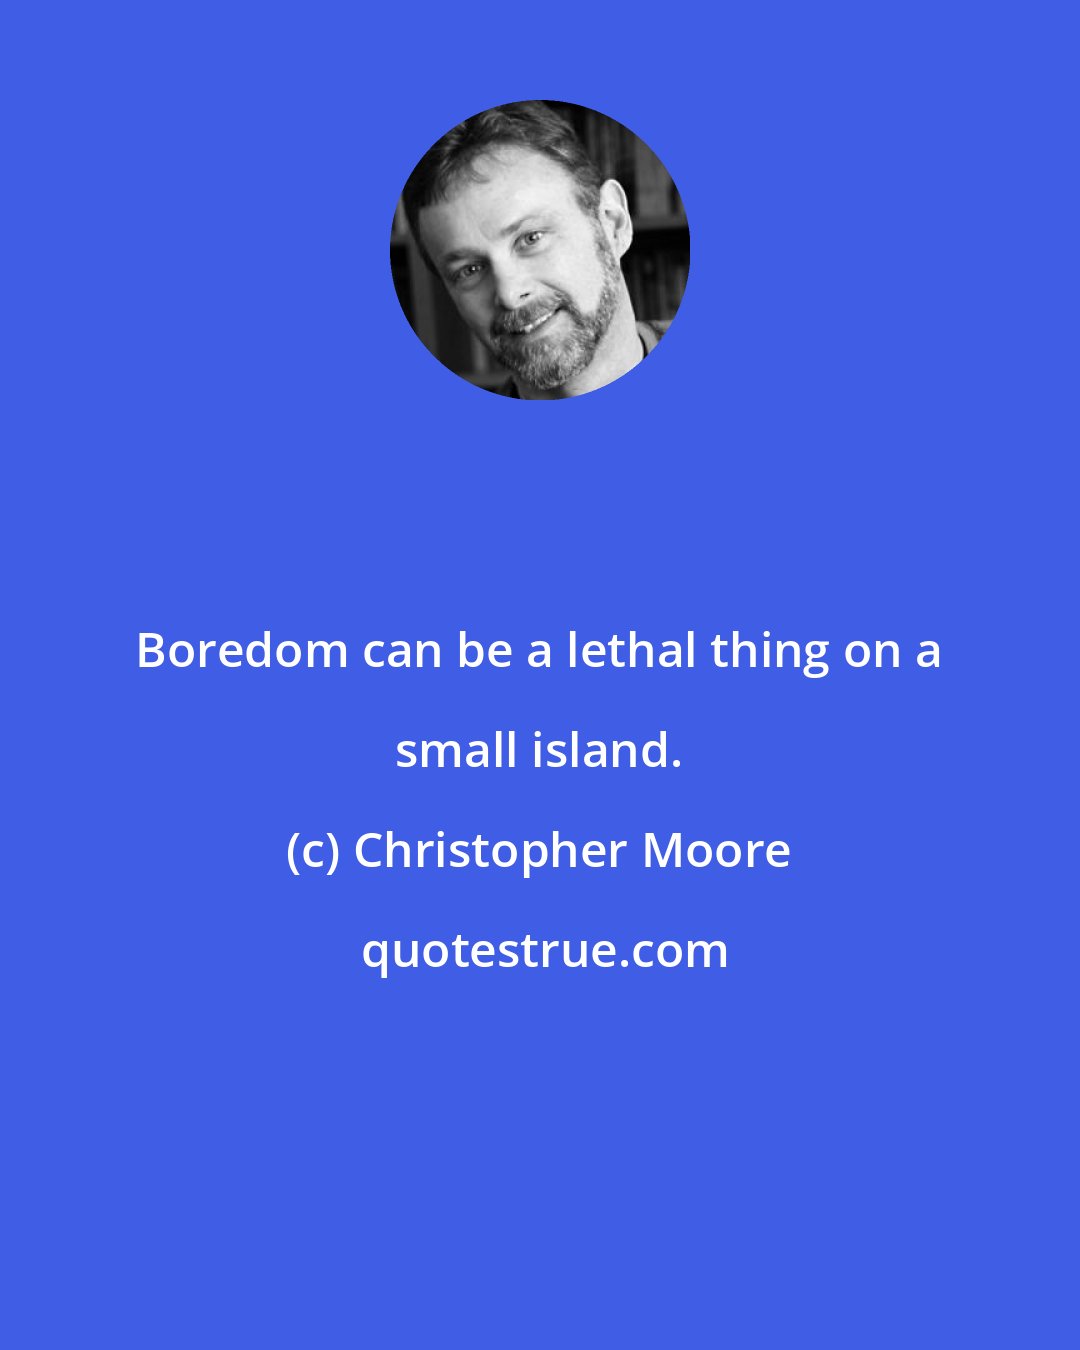 Christopher Moore: Boredom can be a lethal thing on a small island.